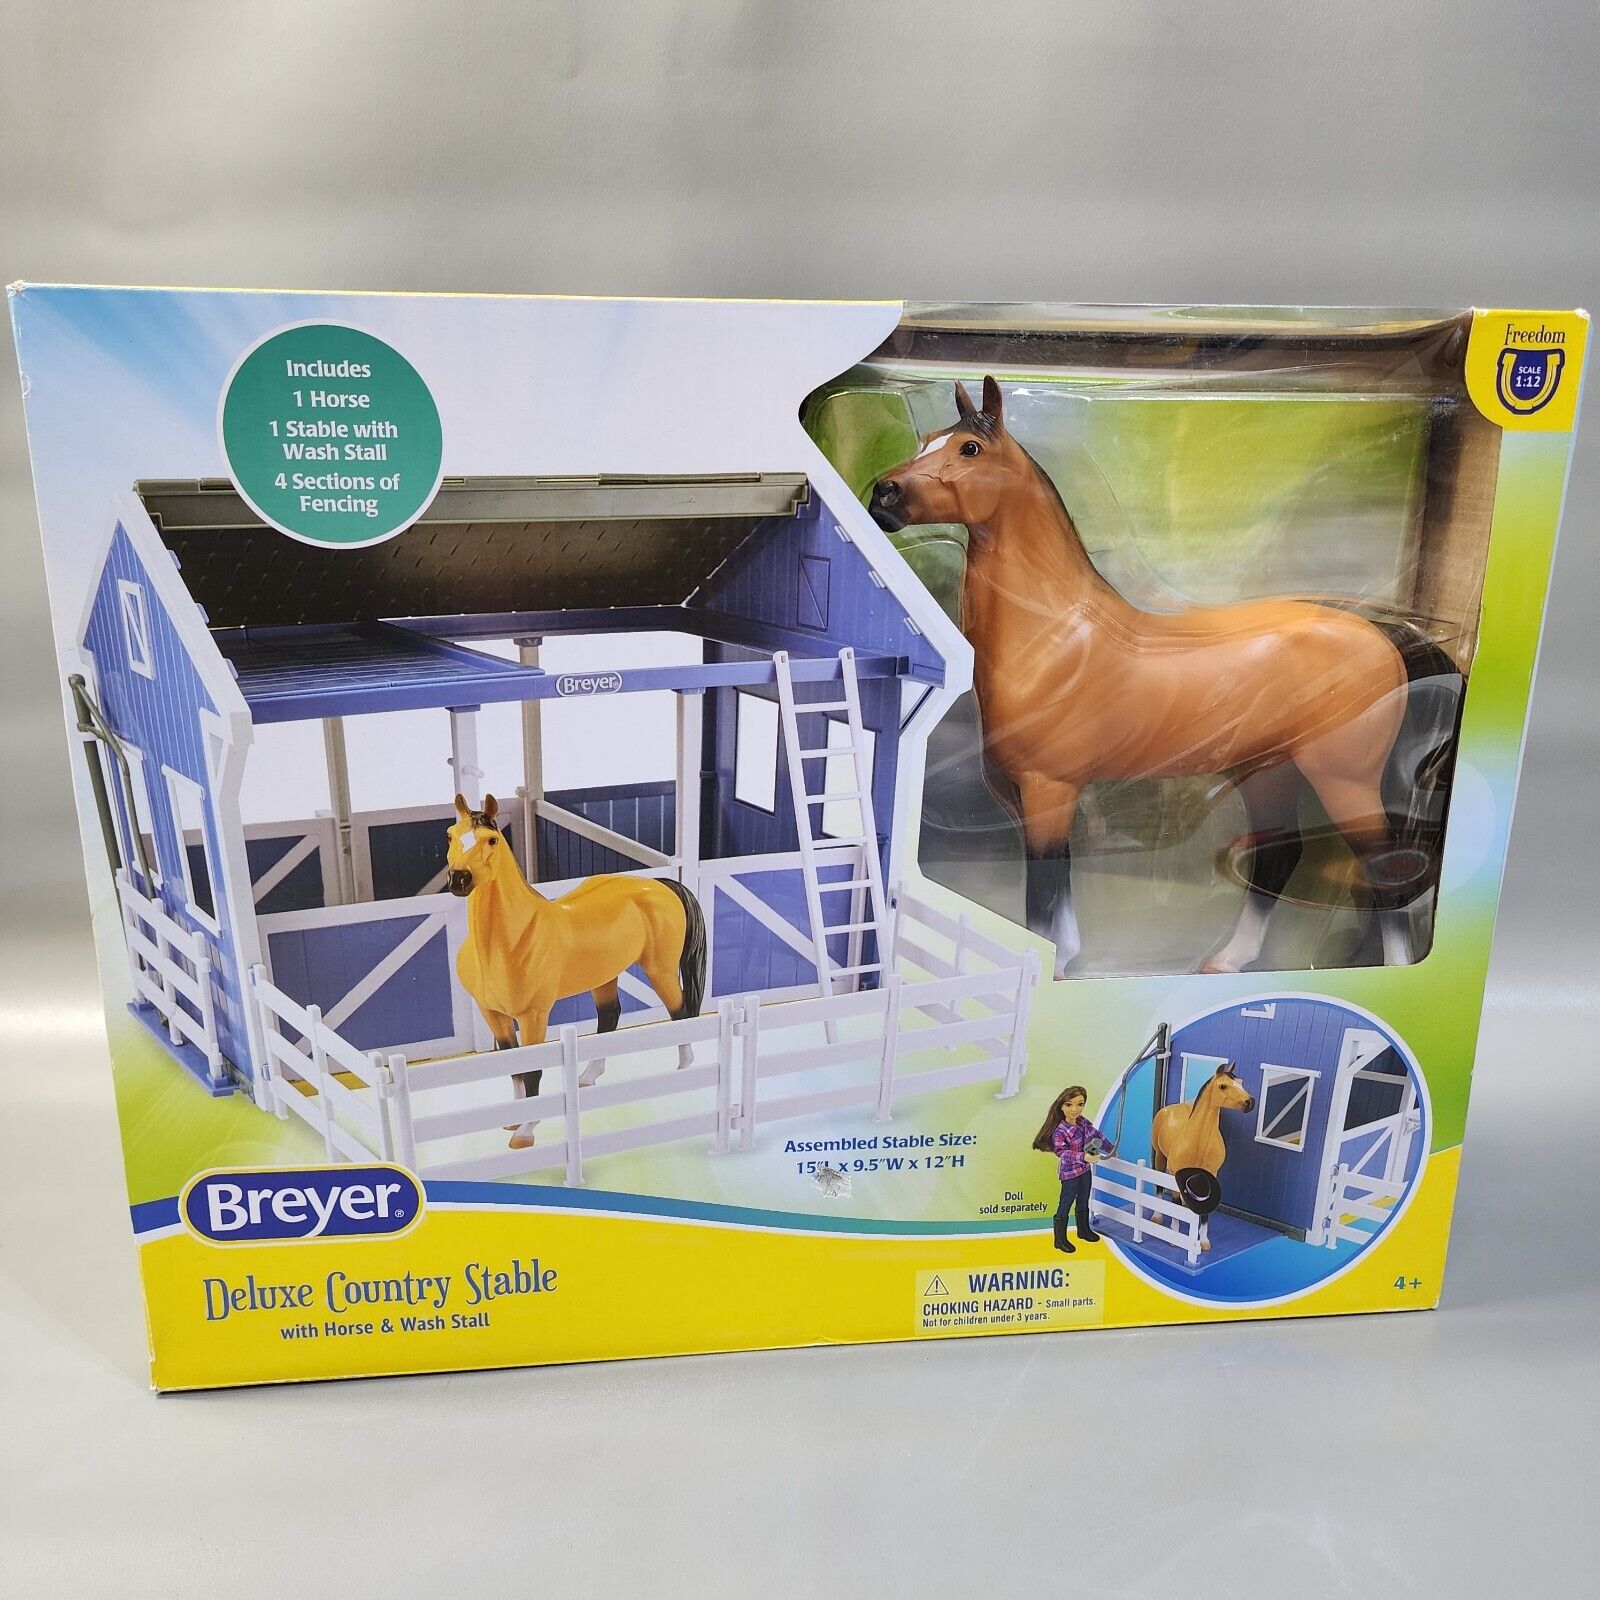 Breyer Deluxe Country Stable Horse Wash Stall 1:12 Classic Freedom Series 61149